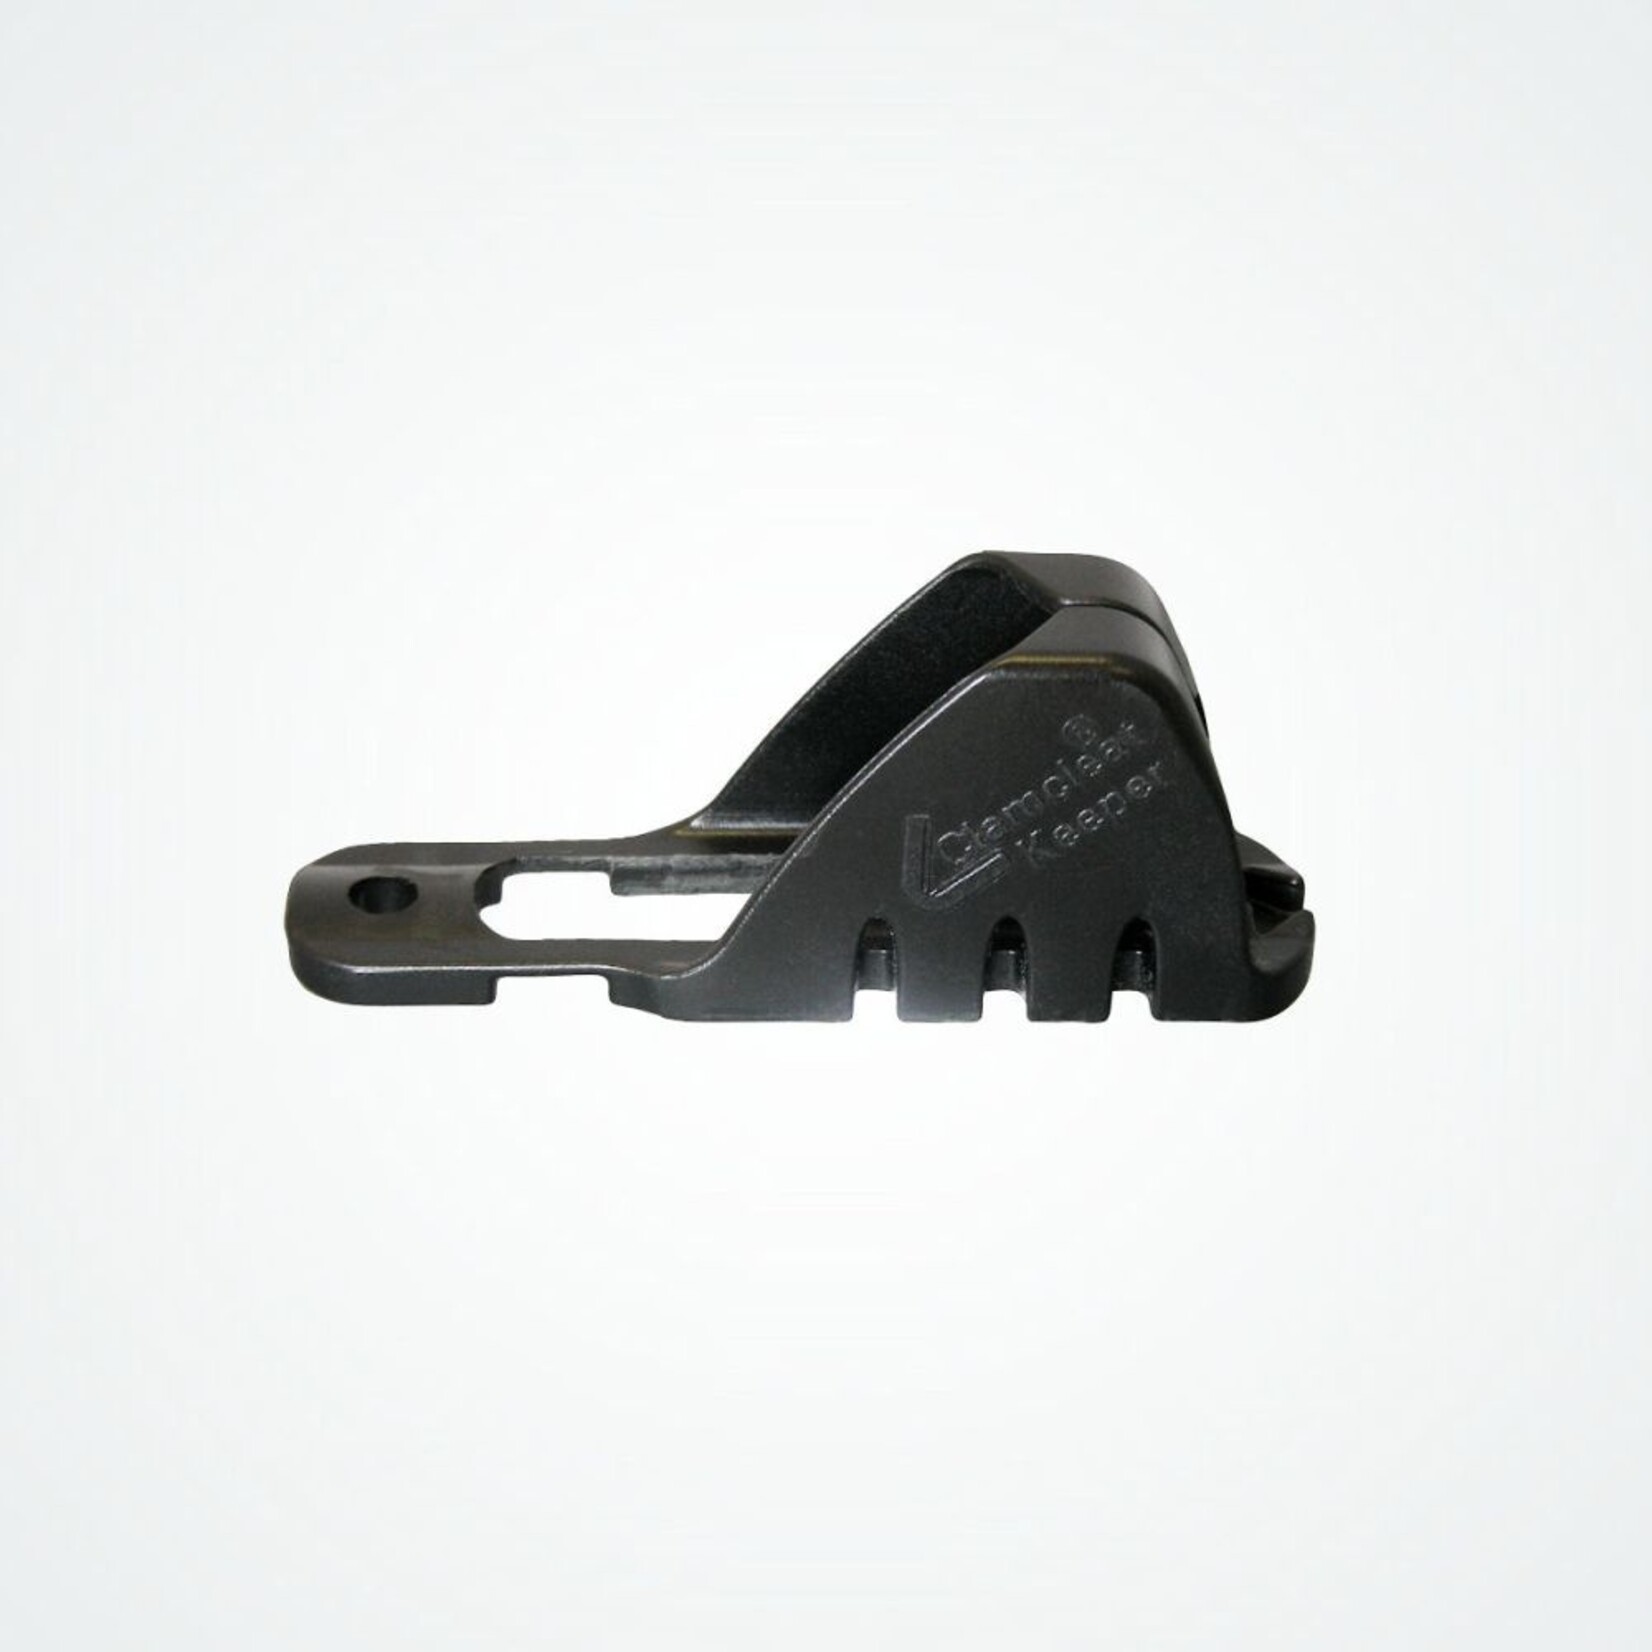 Clamcleat Through-Deck Keeper for CL230 & CL230AN